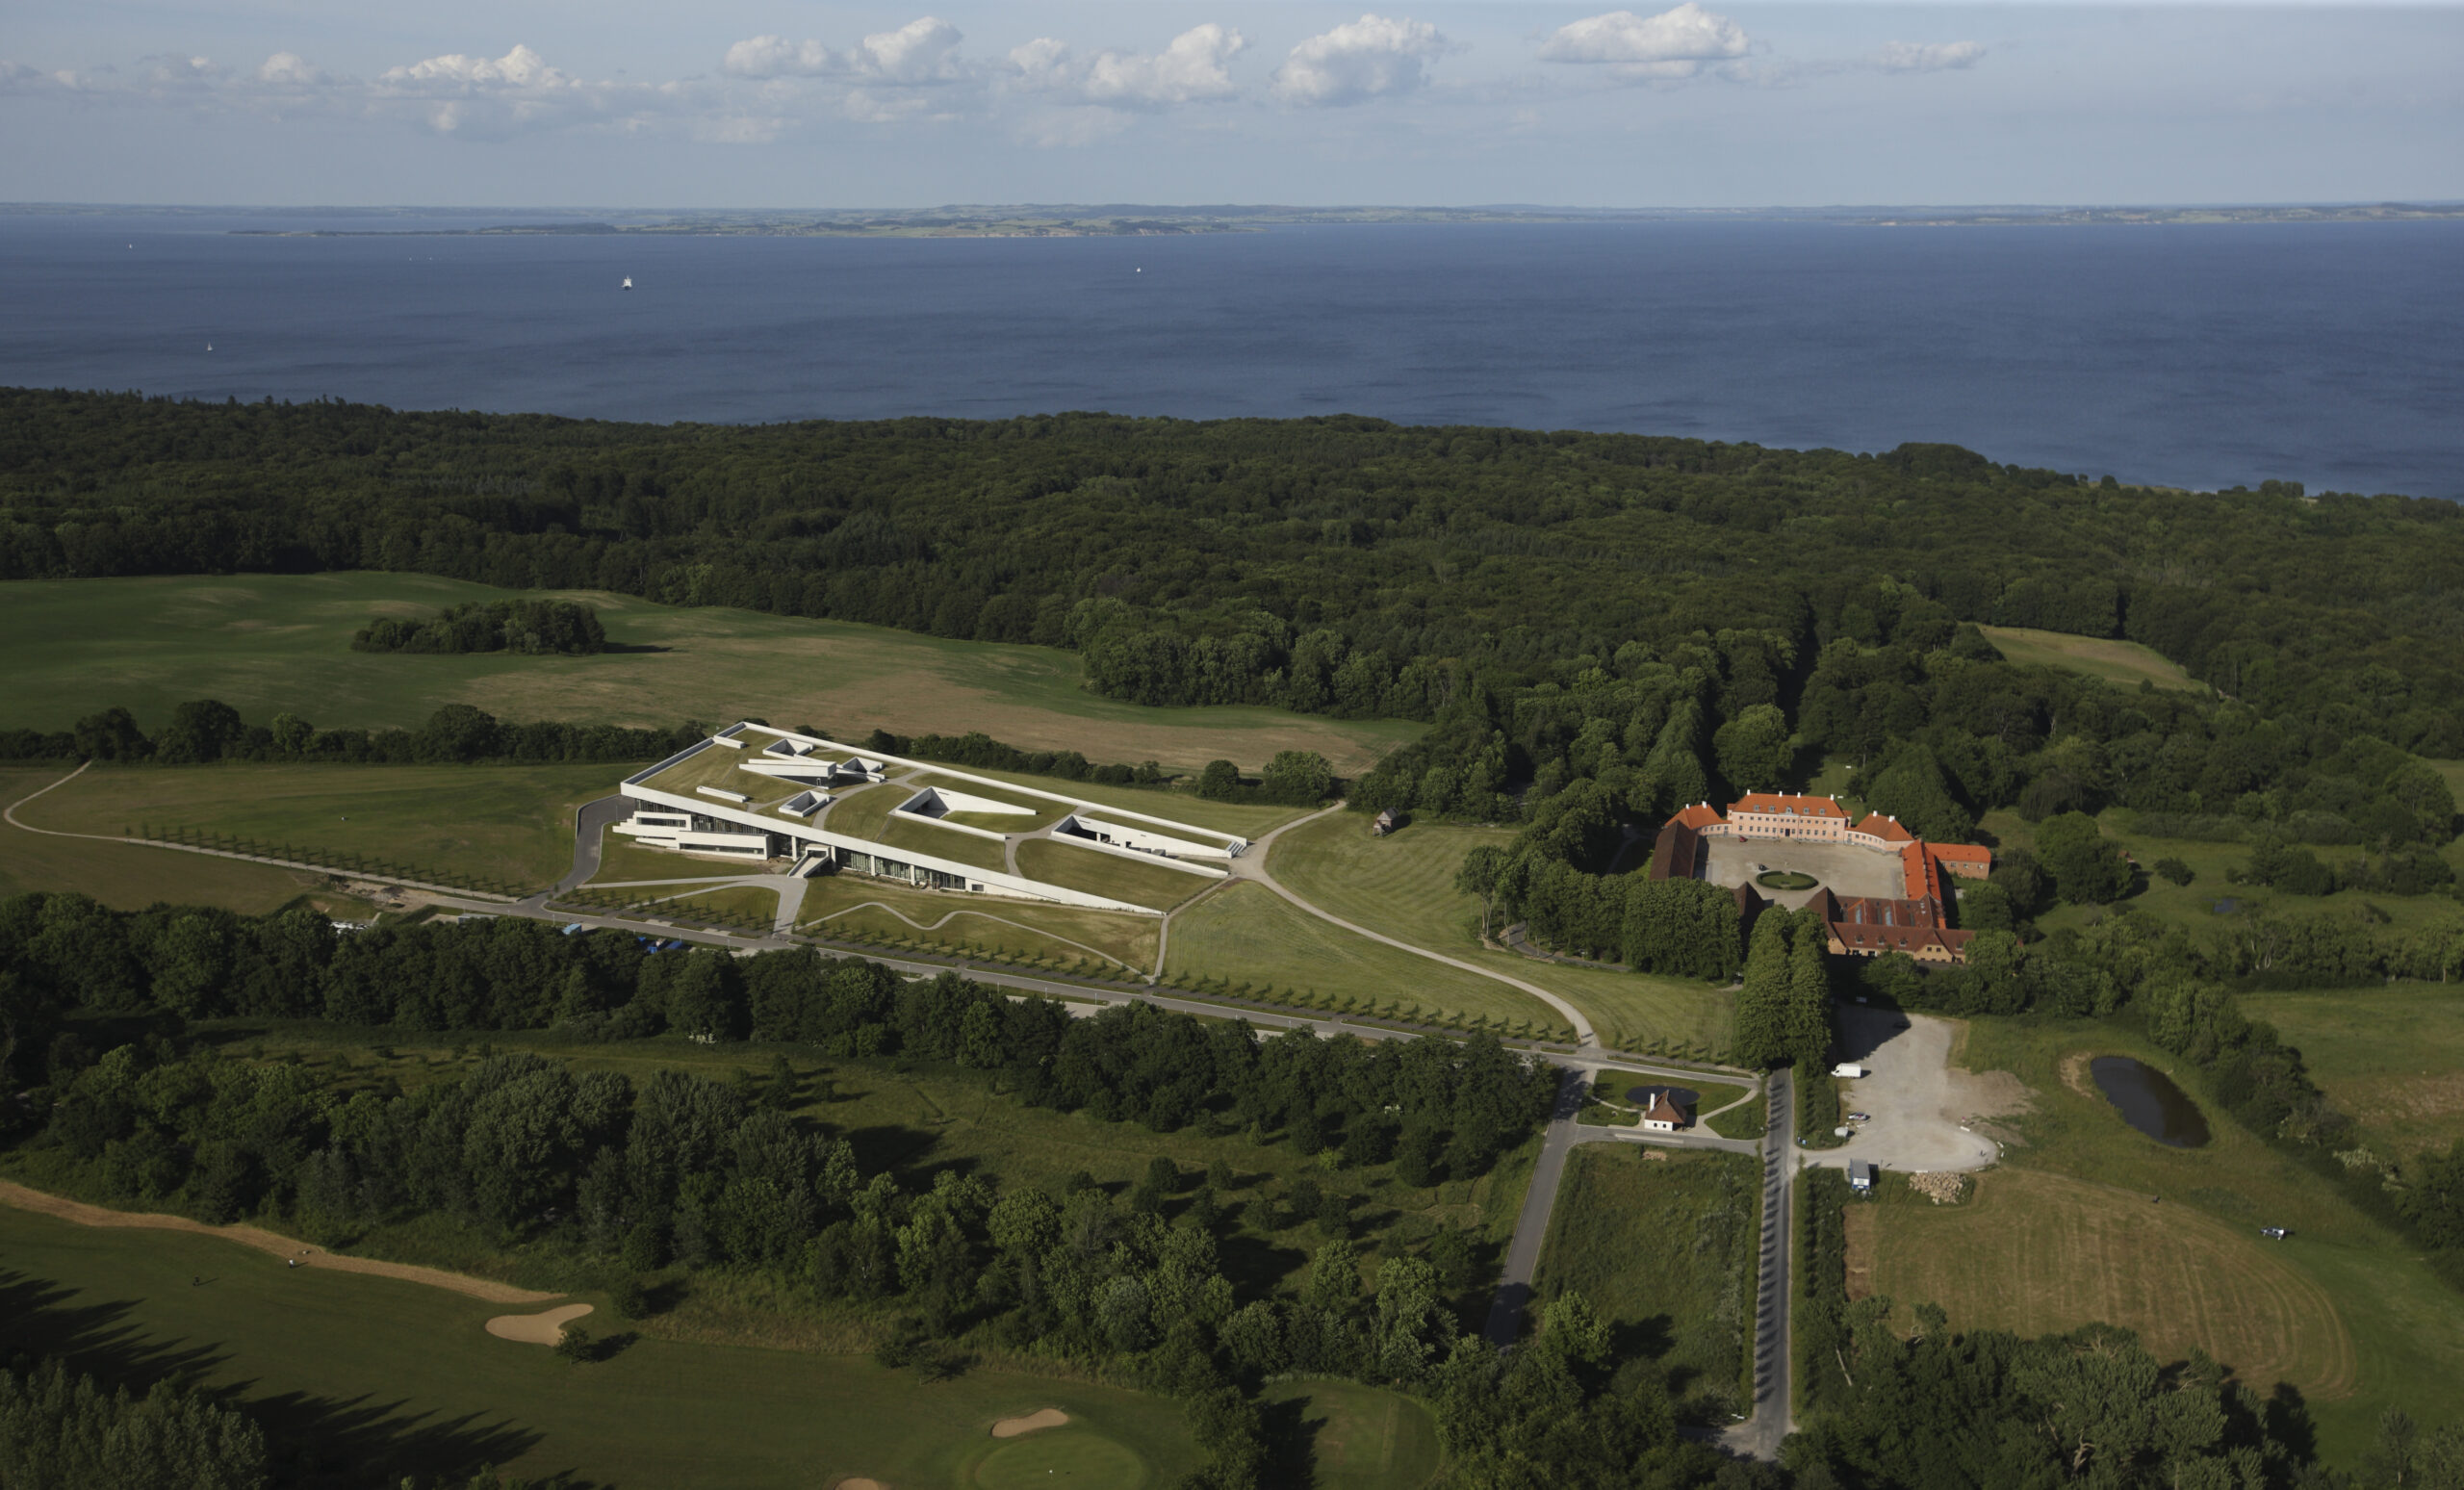 A semi-areal view showing Moesgaard Museum by Henning Larsen blending with the landscape